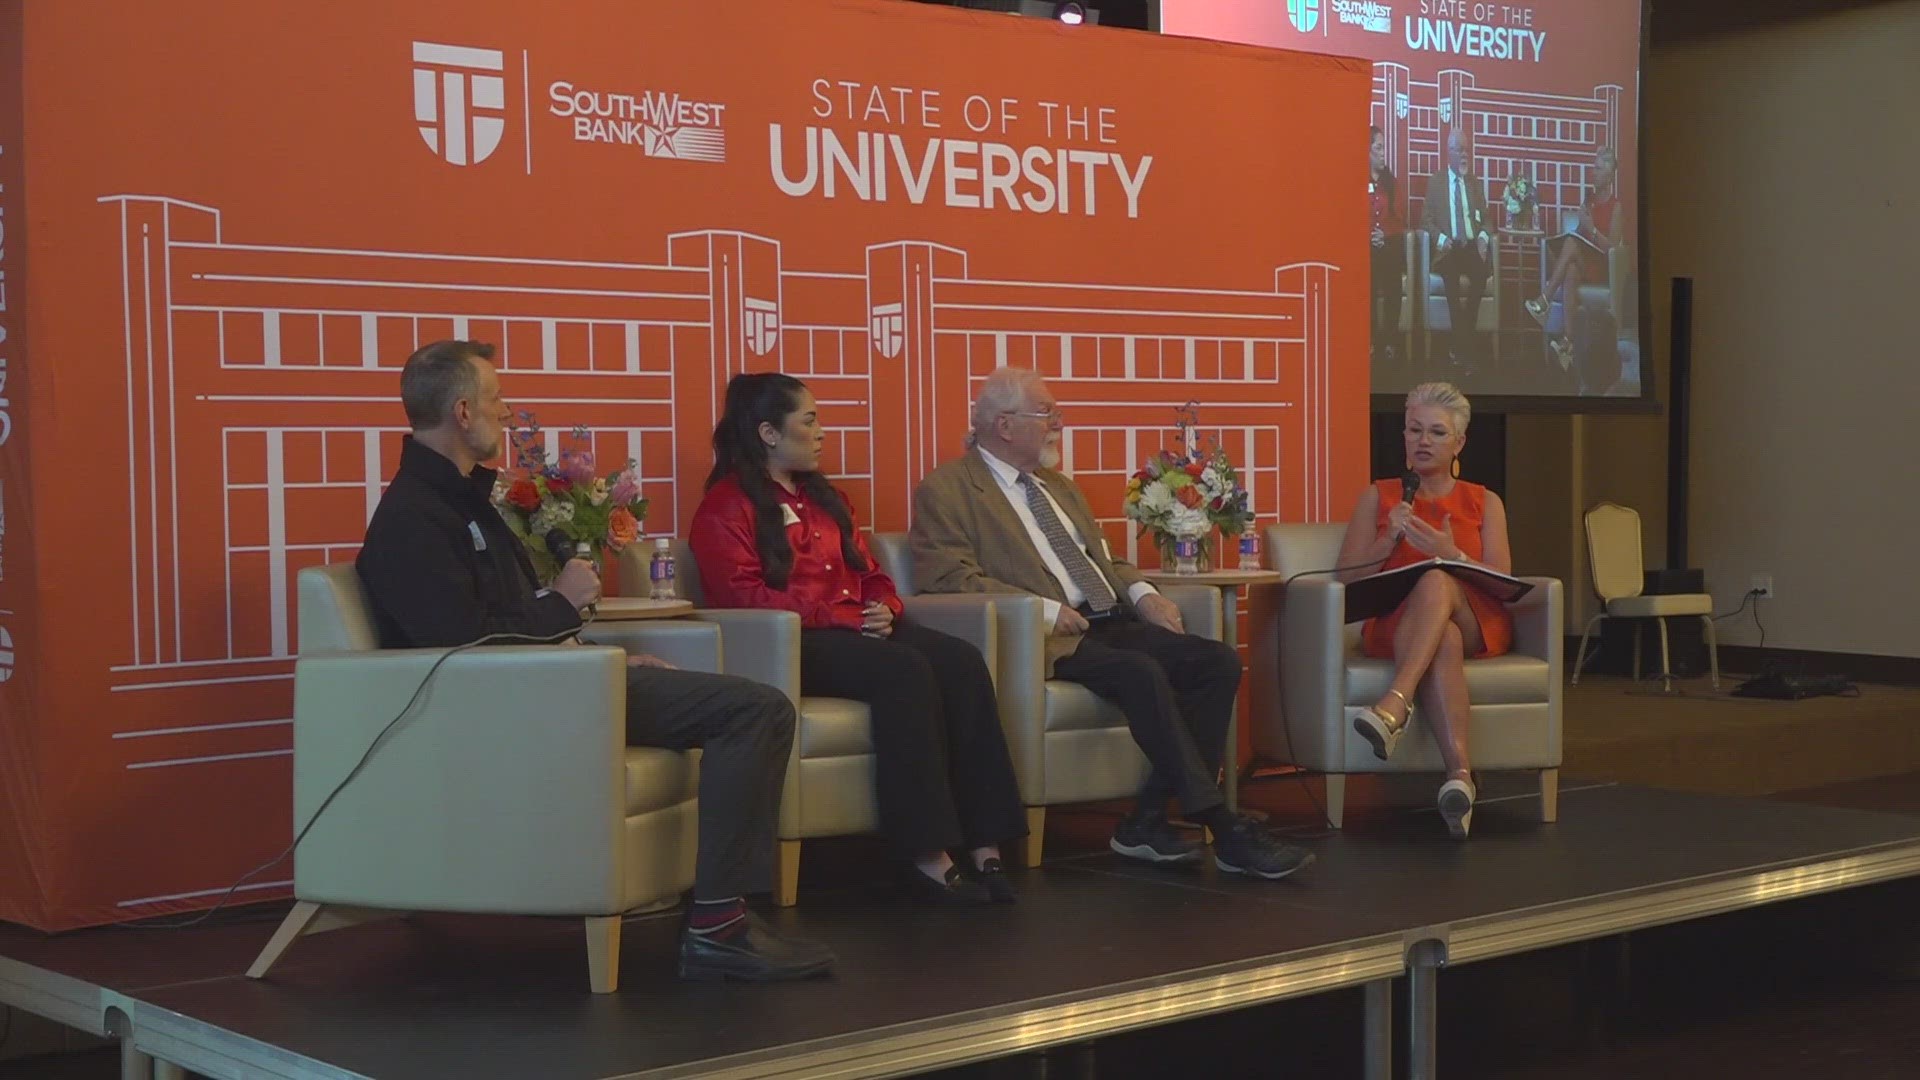 UTPB has a focus on curriculum that will provide the workforce moving forward. University and community leaders continue to work to meet future regional needs.